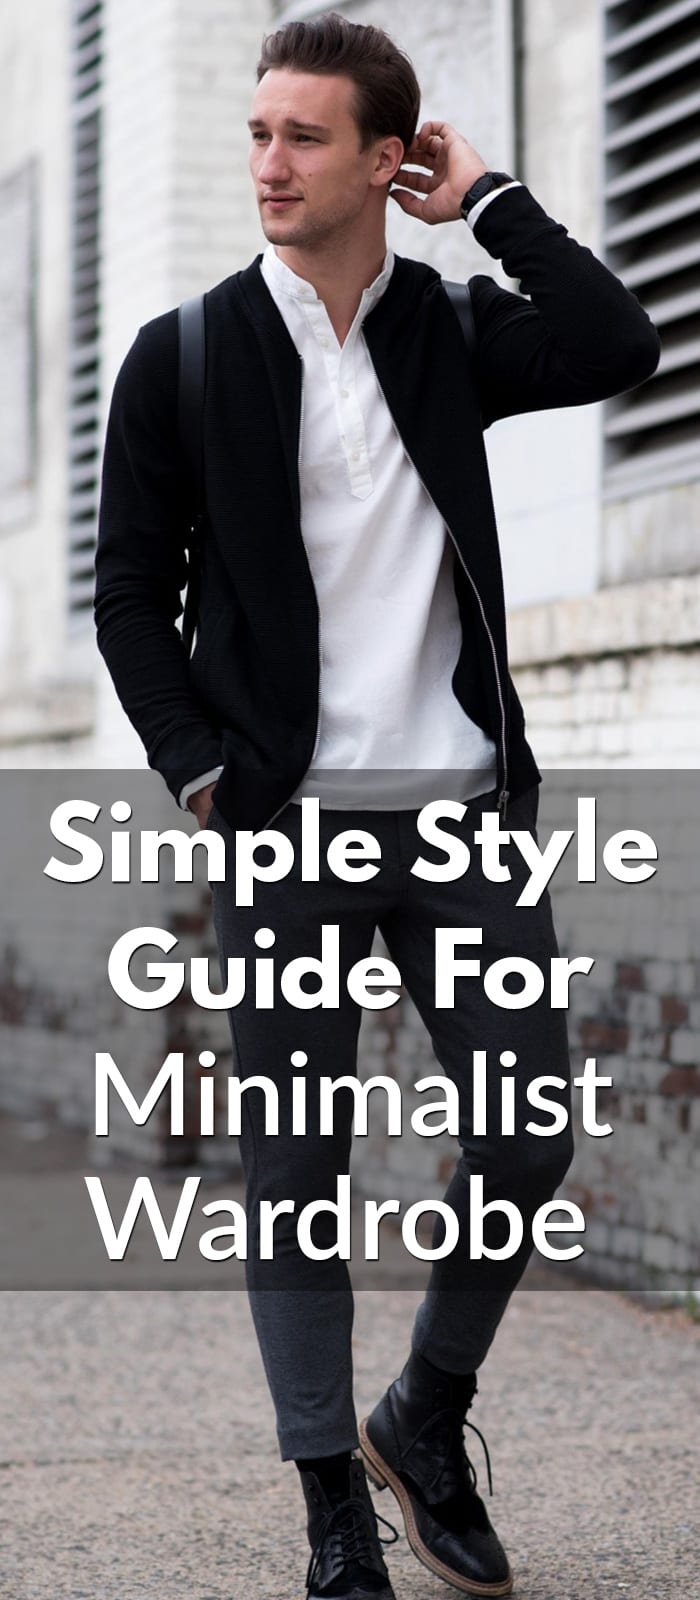 Simple Style Guide For Minimalist Wardrobe